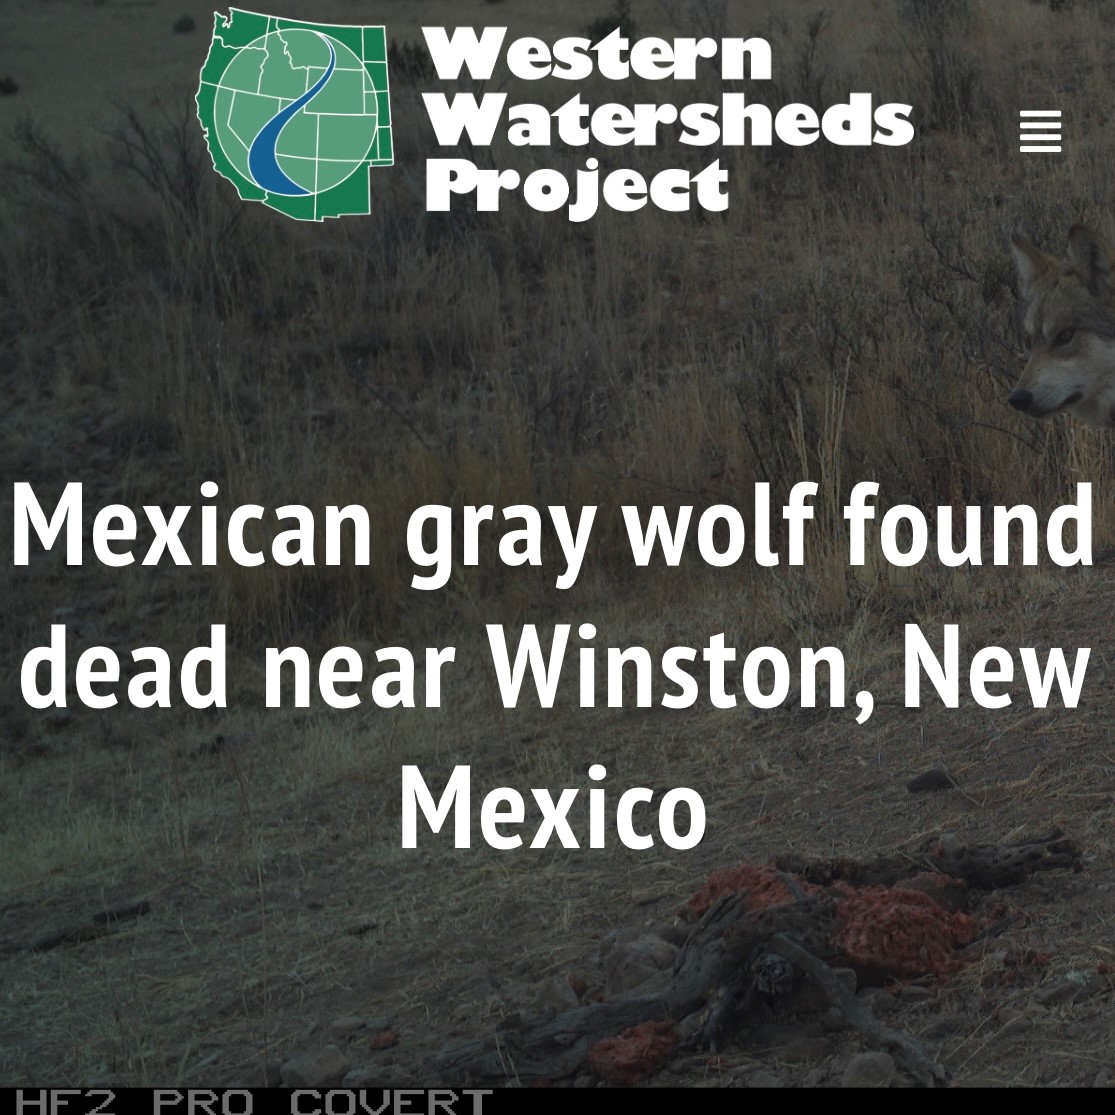 🚨BREAKING🚨 An endangered male Mexican wolf was found dead in NM - an investigation is underway. M1693 was valuable both to his family + genetically. More via @wildadvocate ➡ westernwatersheds.org/2022/10/mexica…